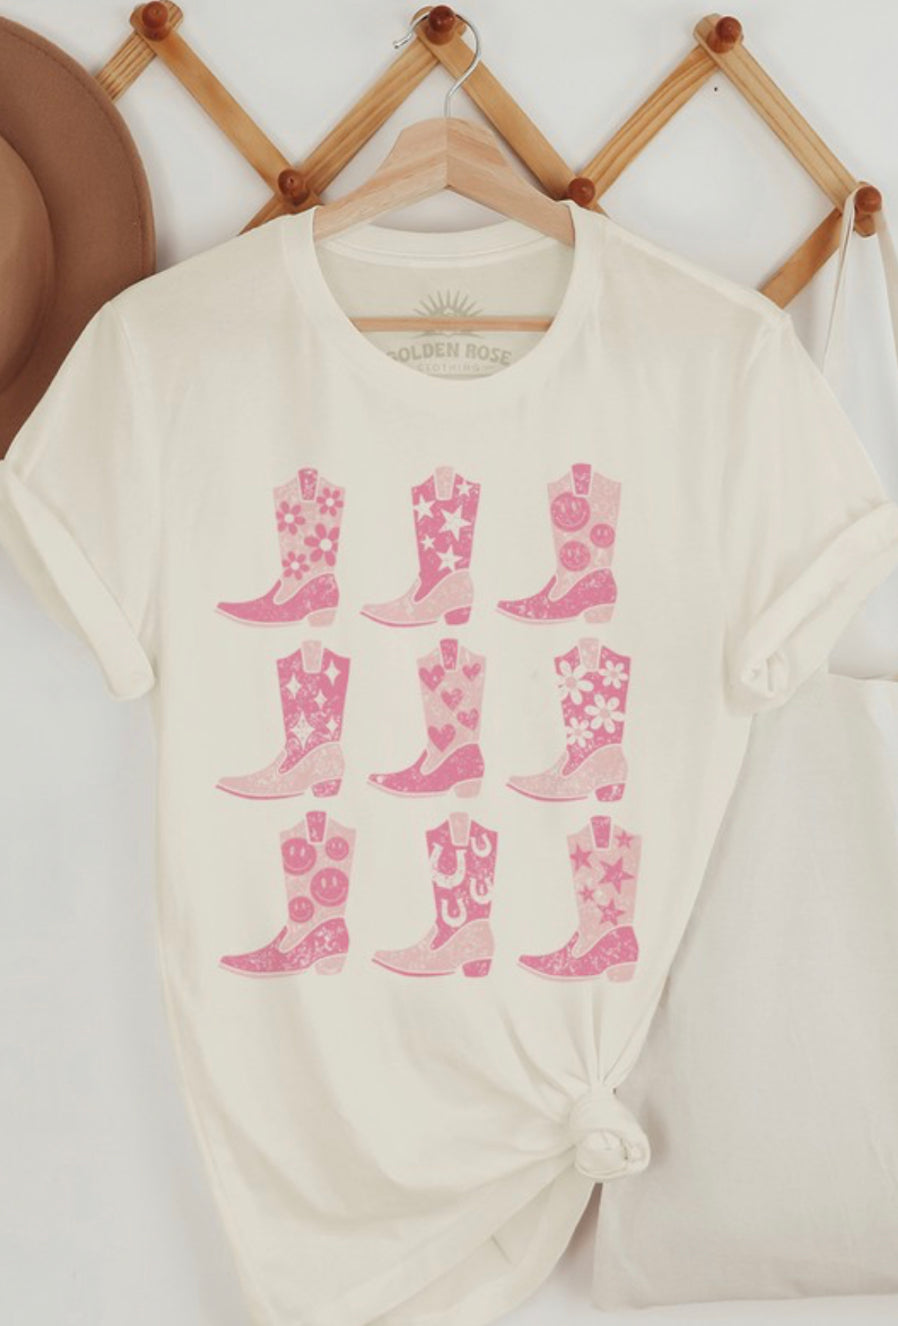 Pink Boots Tee- Oversized